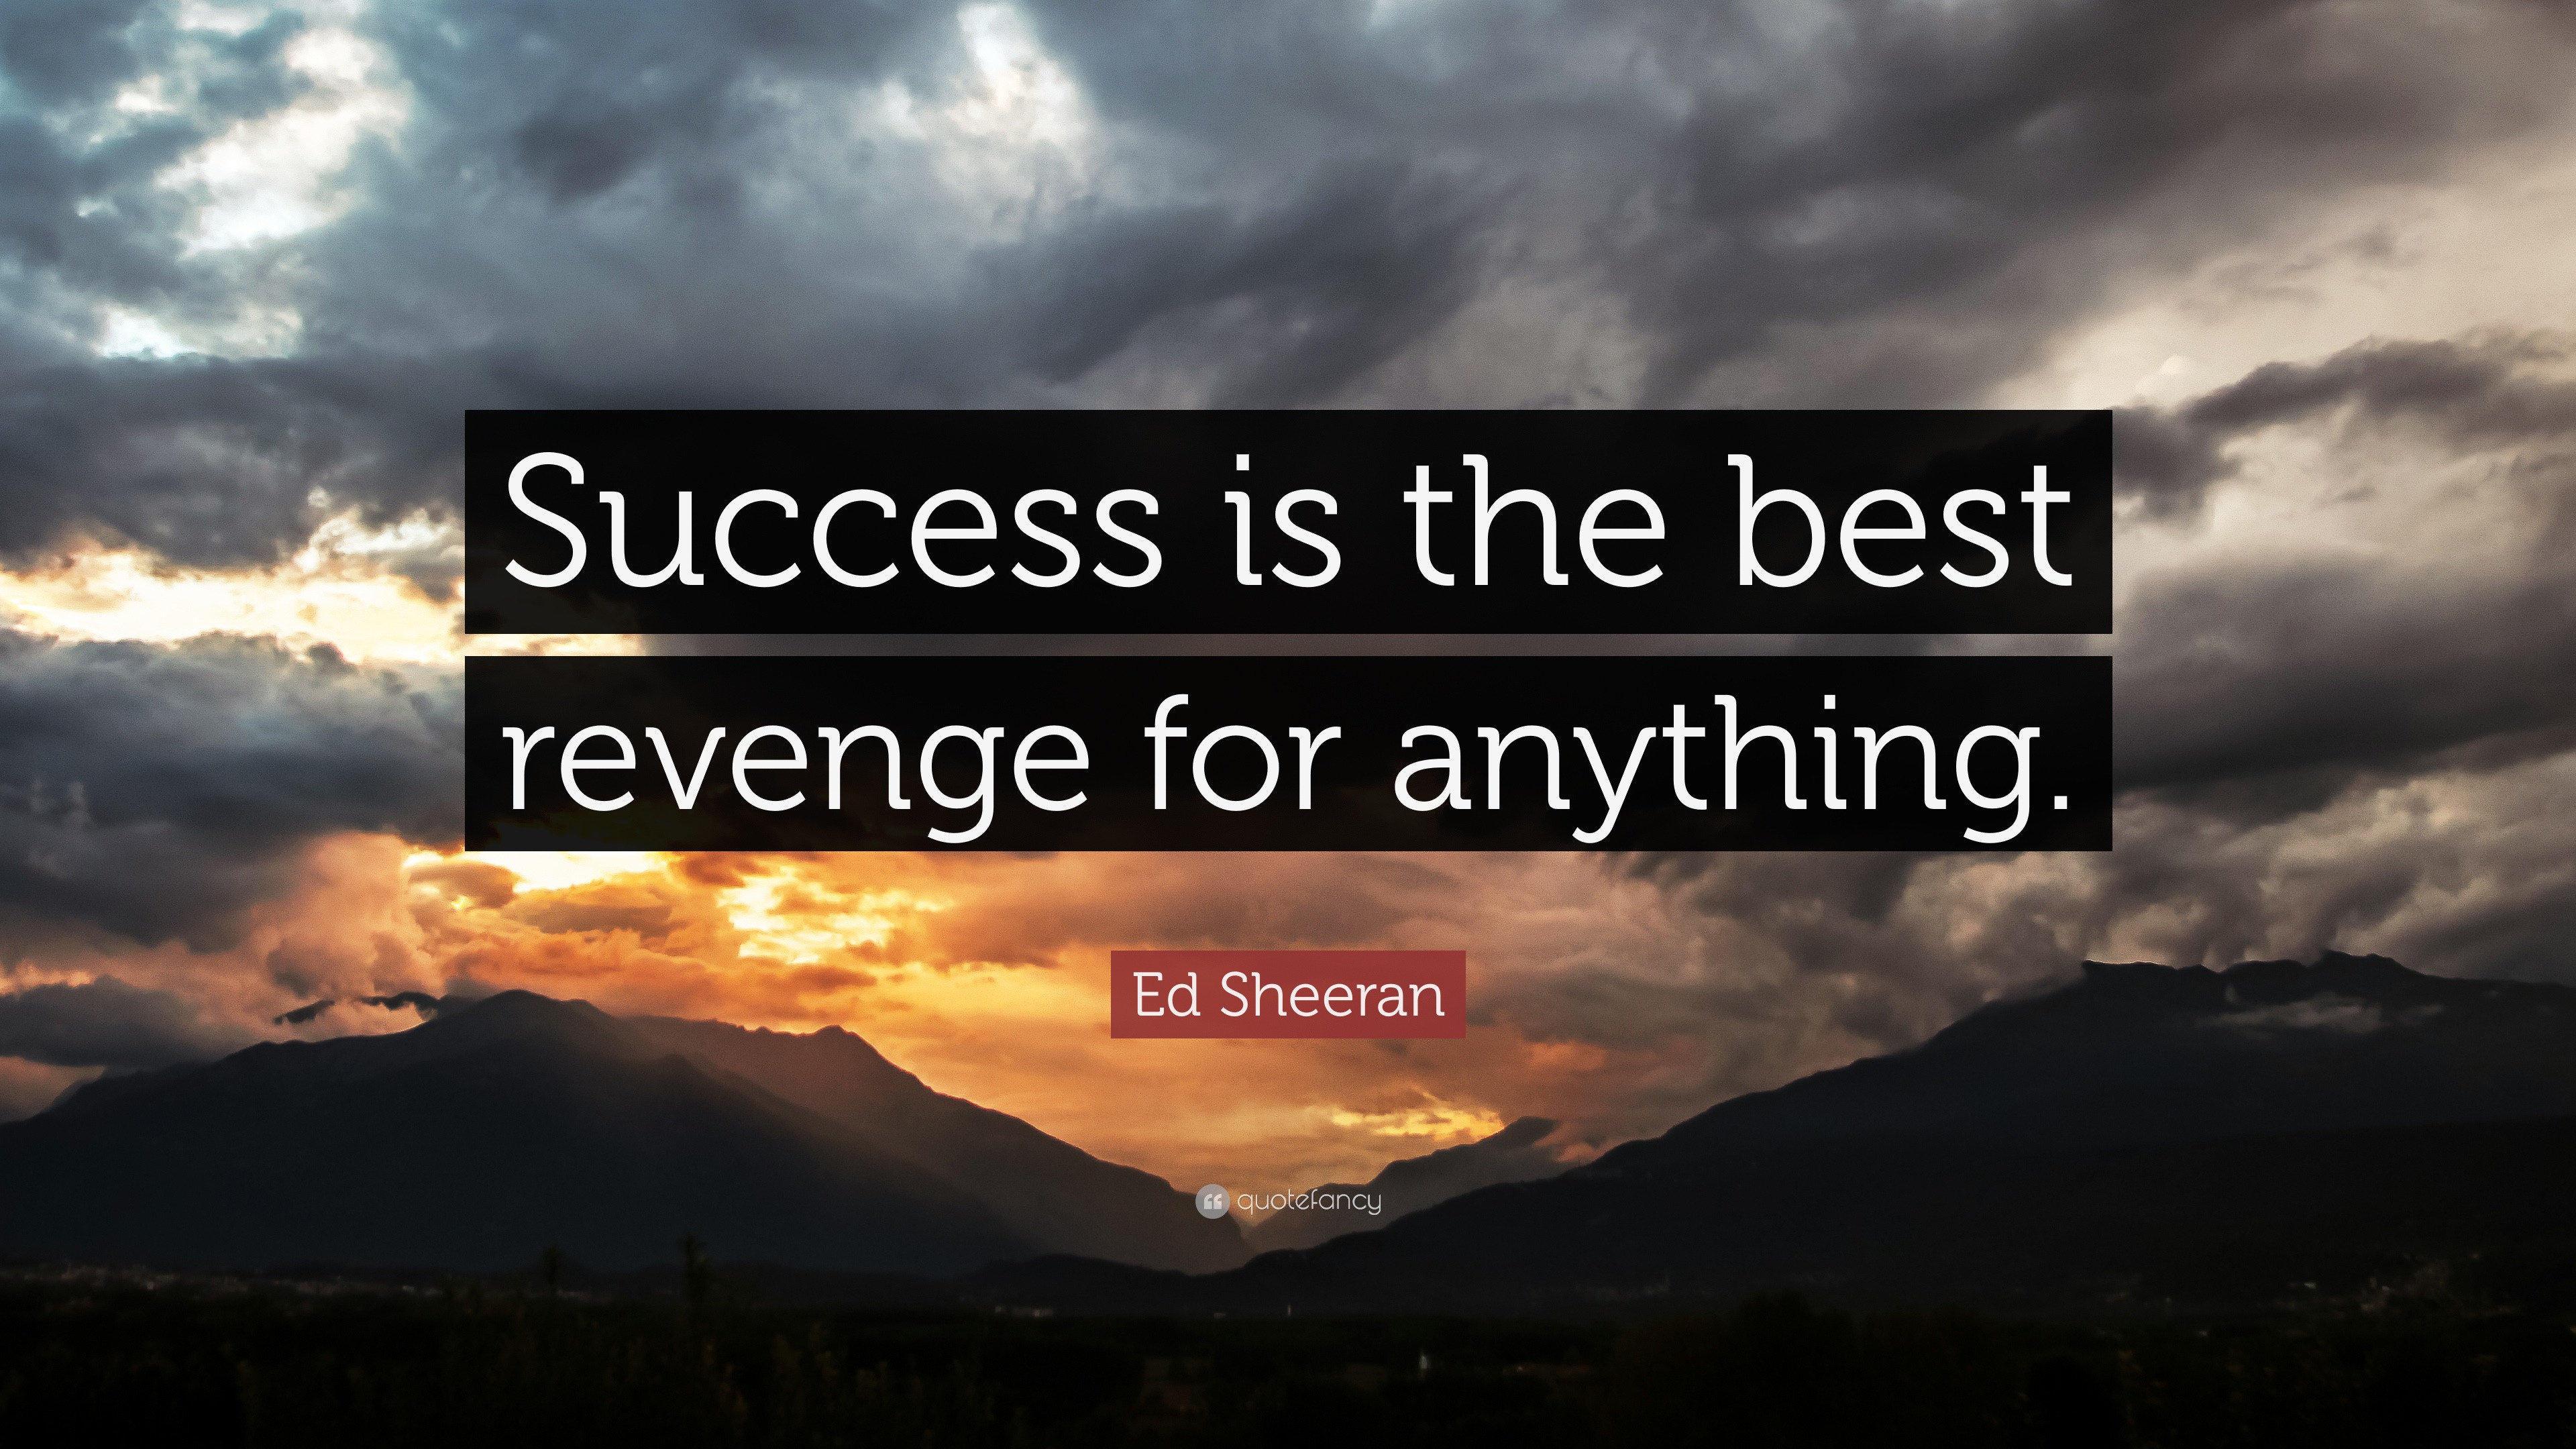 Ed Sheeran Quote: “Success is the best revenge for anything.”